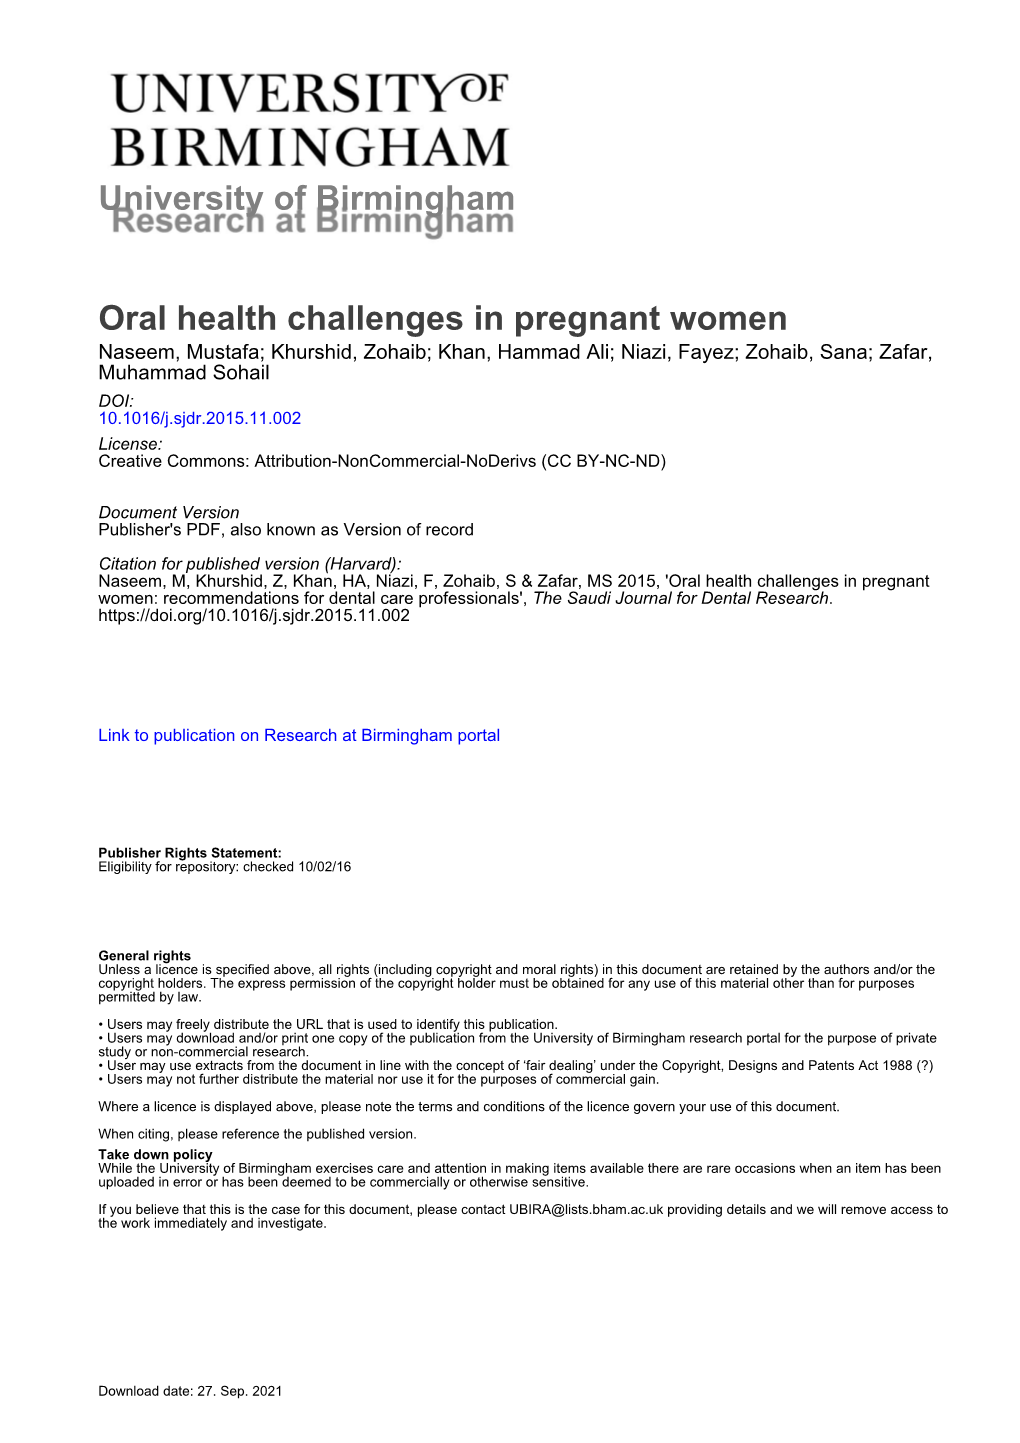 Oral Health Challenges in Pregnant Women